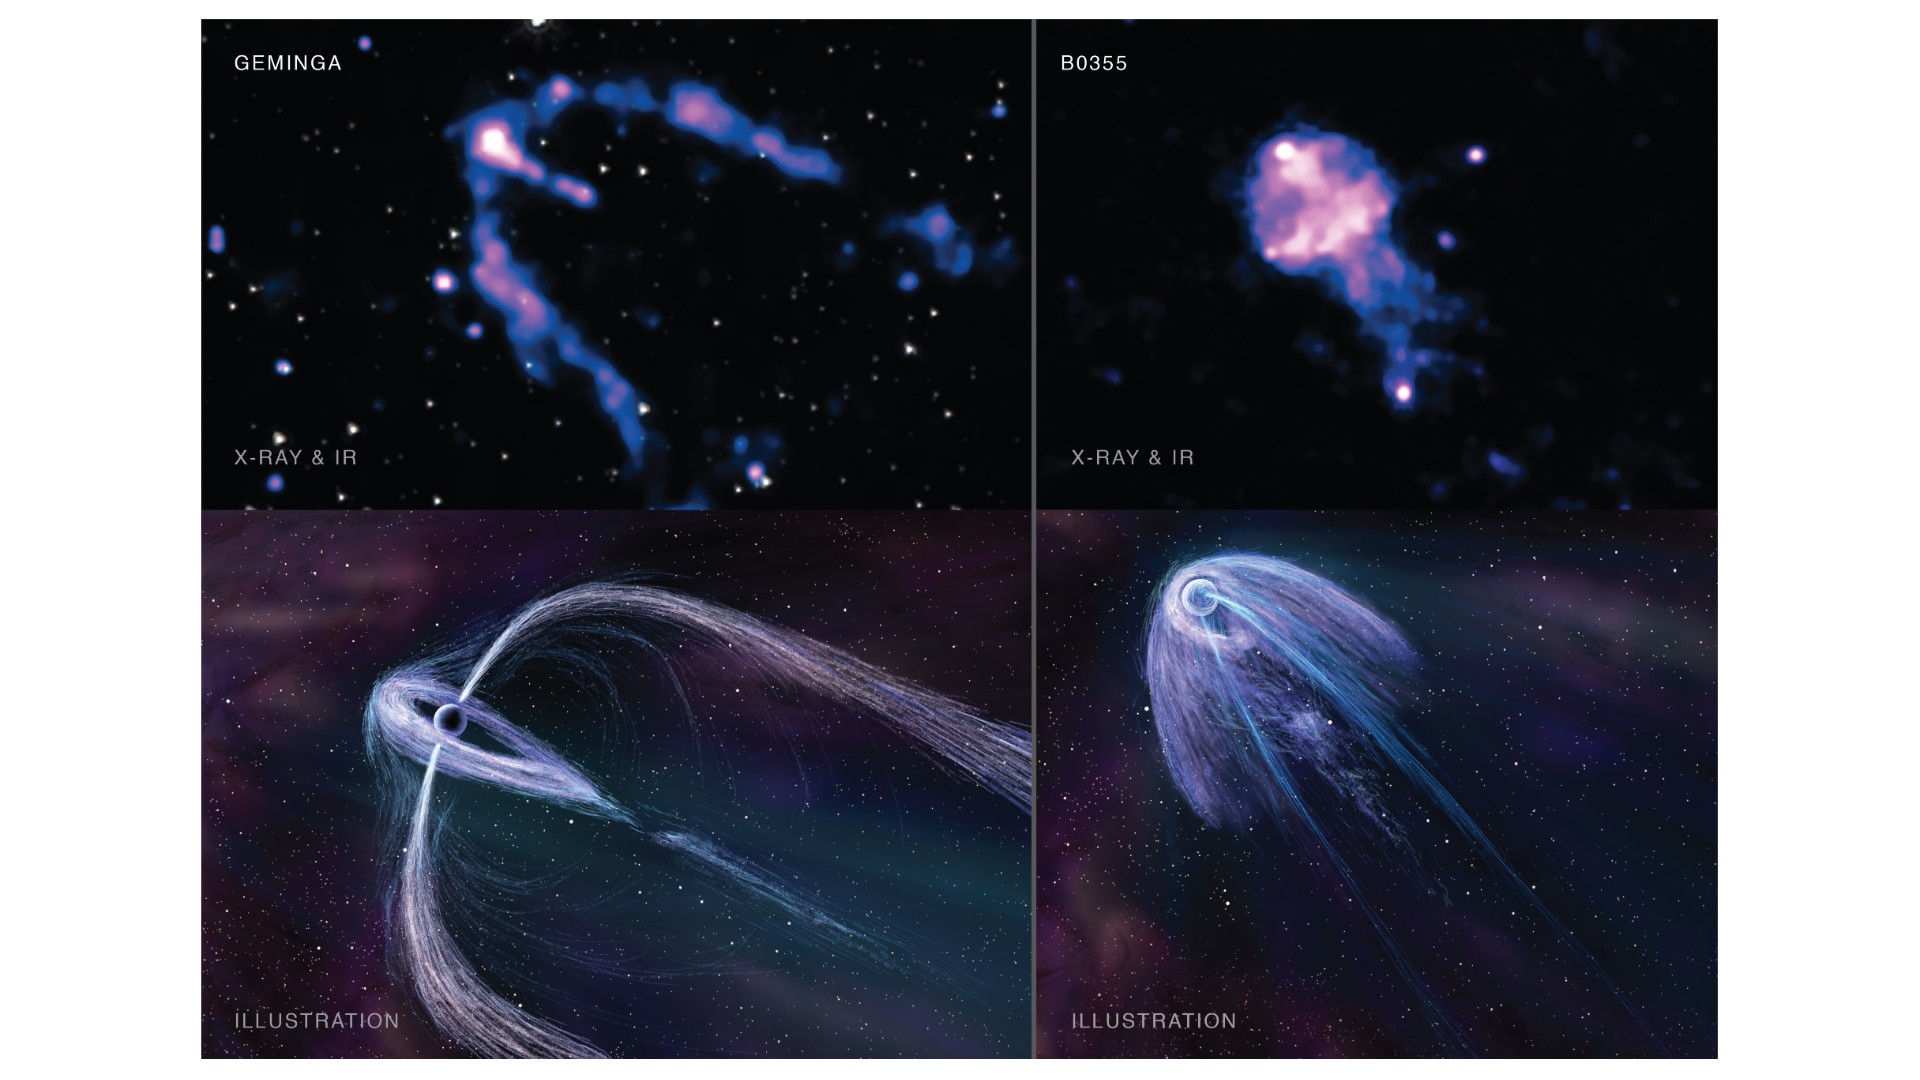 This four-panel graphic shows two wristbands seen by Chandra.  Geminga is at the top left and B0355 + 54 at the top right.  In both images, Chandra's X-rays, in blue and purple, are combined with infrared data from NASA's Spitzer Space Telescope, which shows the stars in the field of view.  Beneath each data image, an artist’s illustration depicts the structure of each pulsar wind nebula by astronomers.